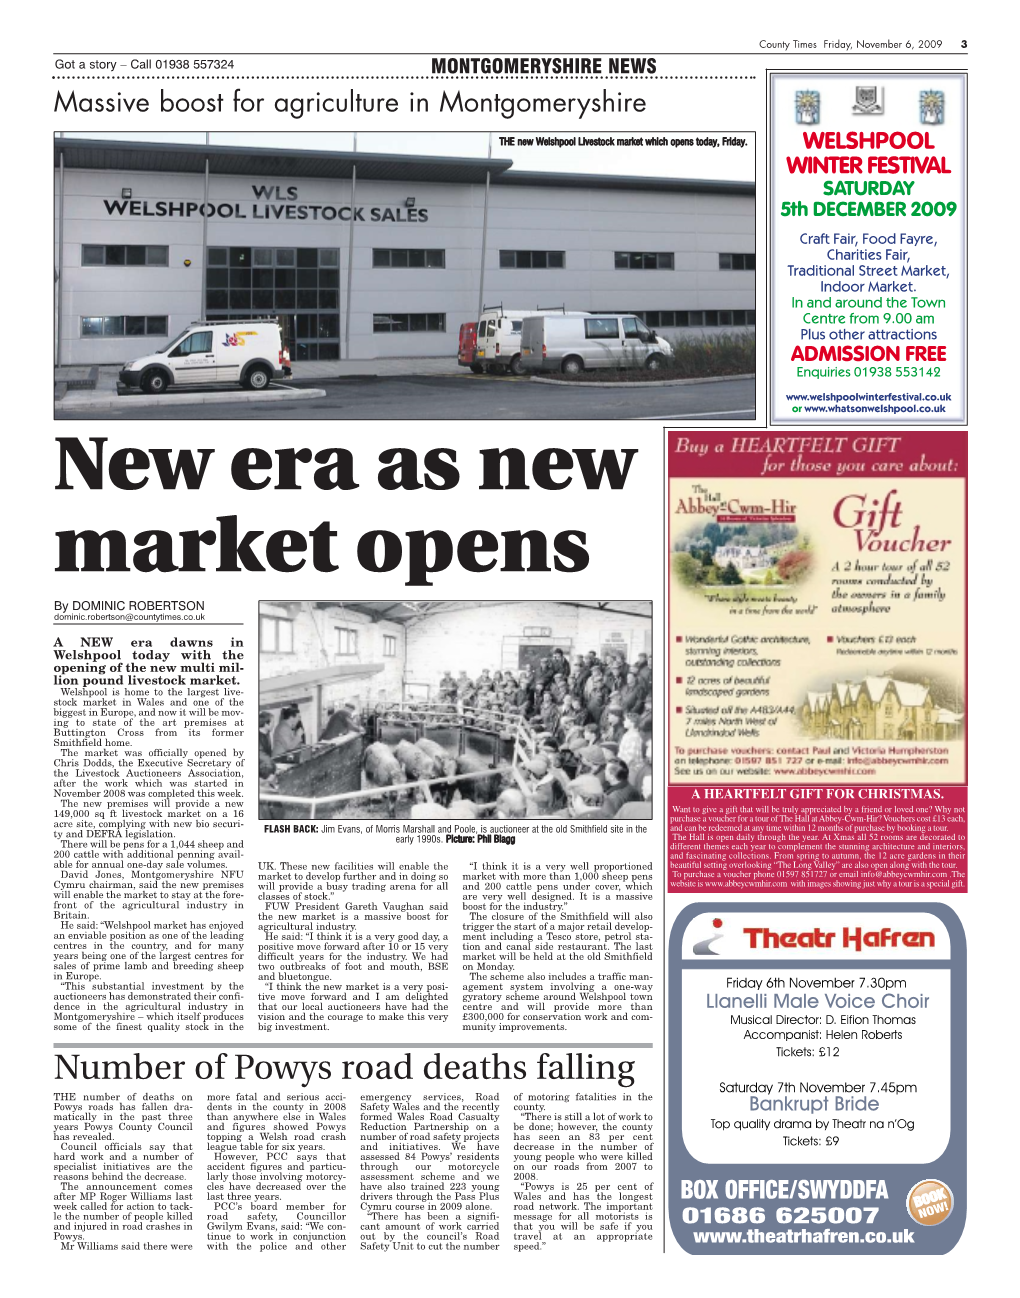 New Era As New Market Opens by DOMINIC ROBERTSON Dominic.Robertson@Countytimes.Co.Uk